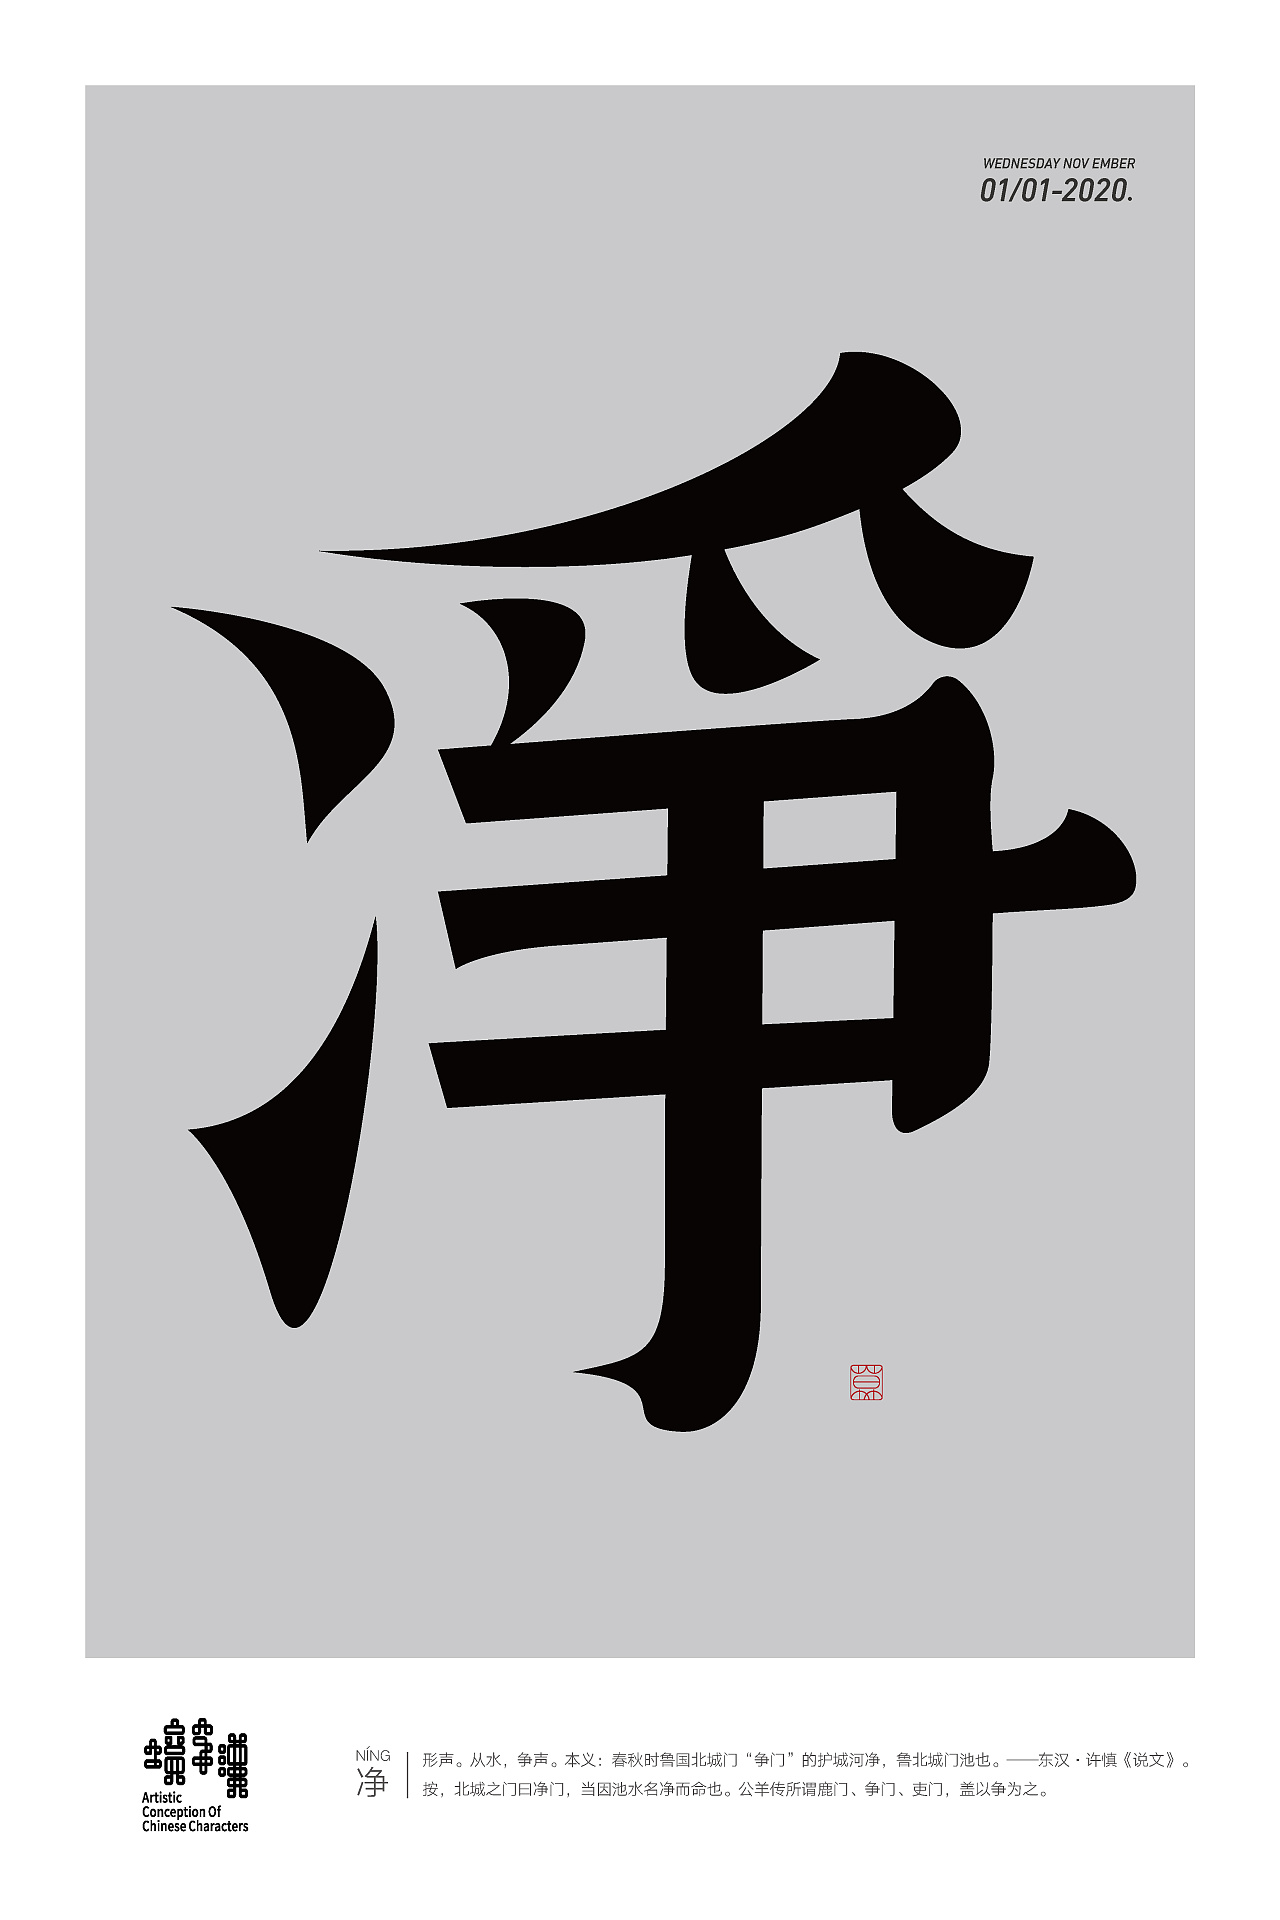 The Chinese language is extensive and profound. Can you understand what it is written?